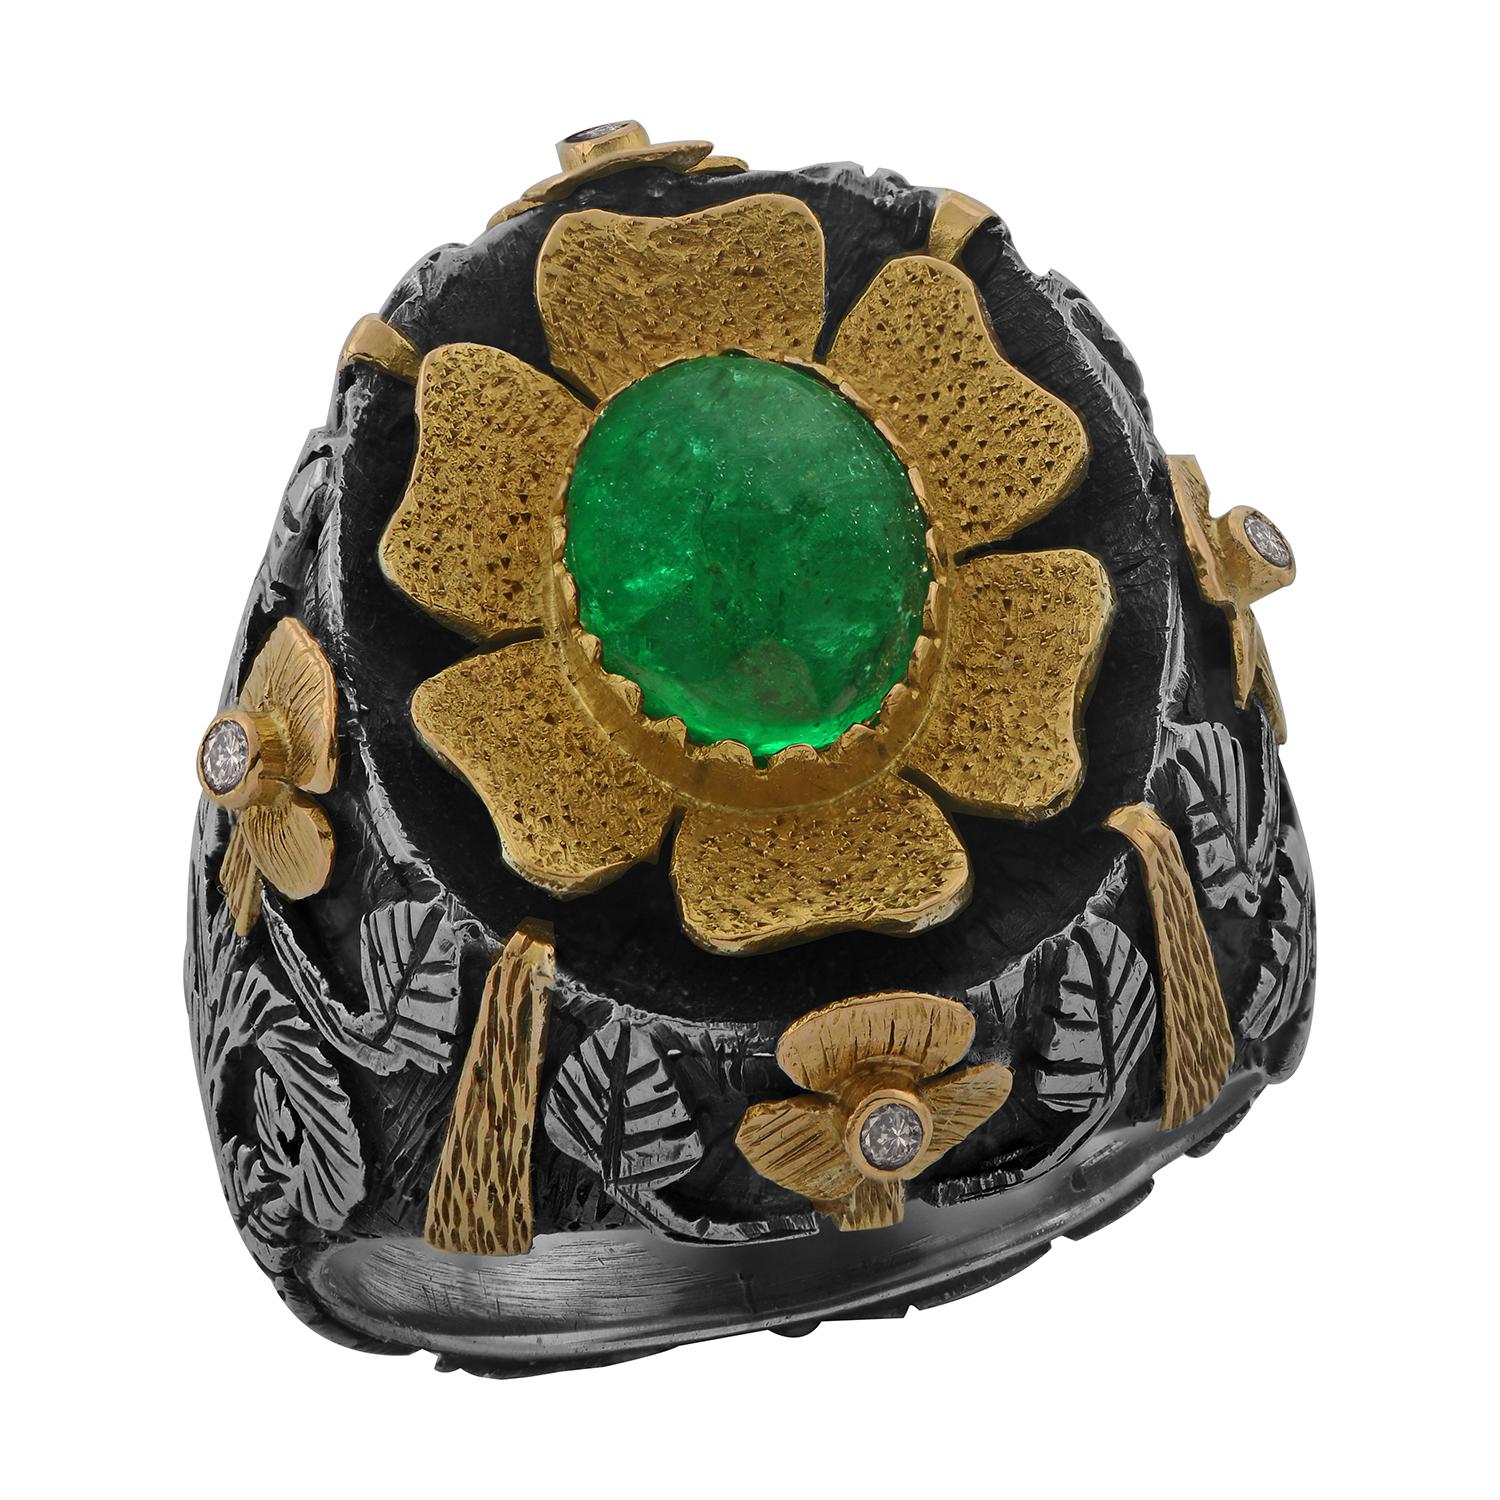 This striking one-of-a-kind emerald diamond cocktail ring has been handmade in our workshops. It has a central cabochon emerald which is set in 18k gold and is surrounded by full-cut diamonds also set in 18k gold. The shank is made in a mixture of